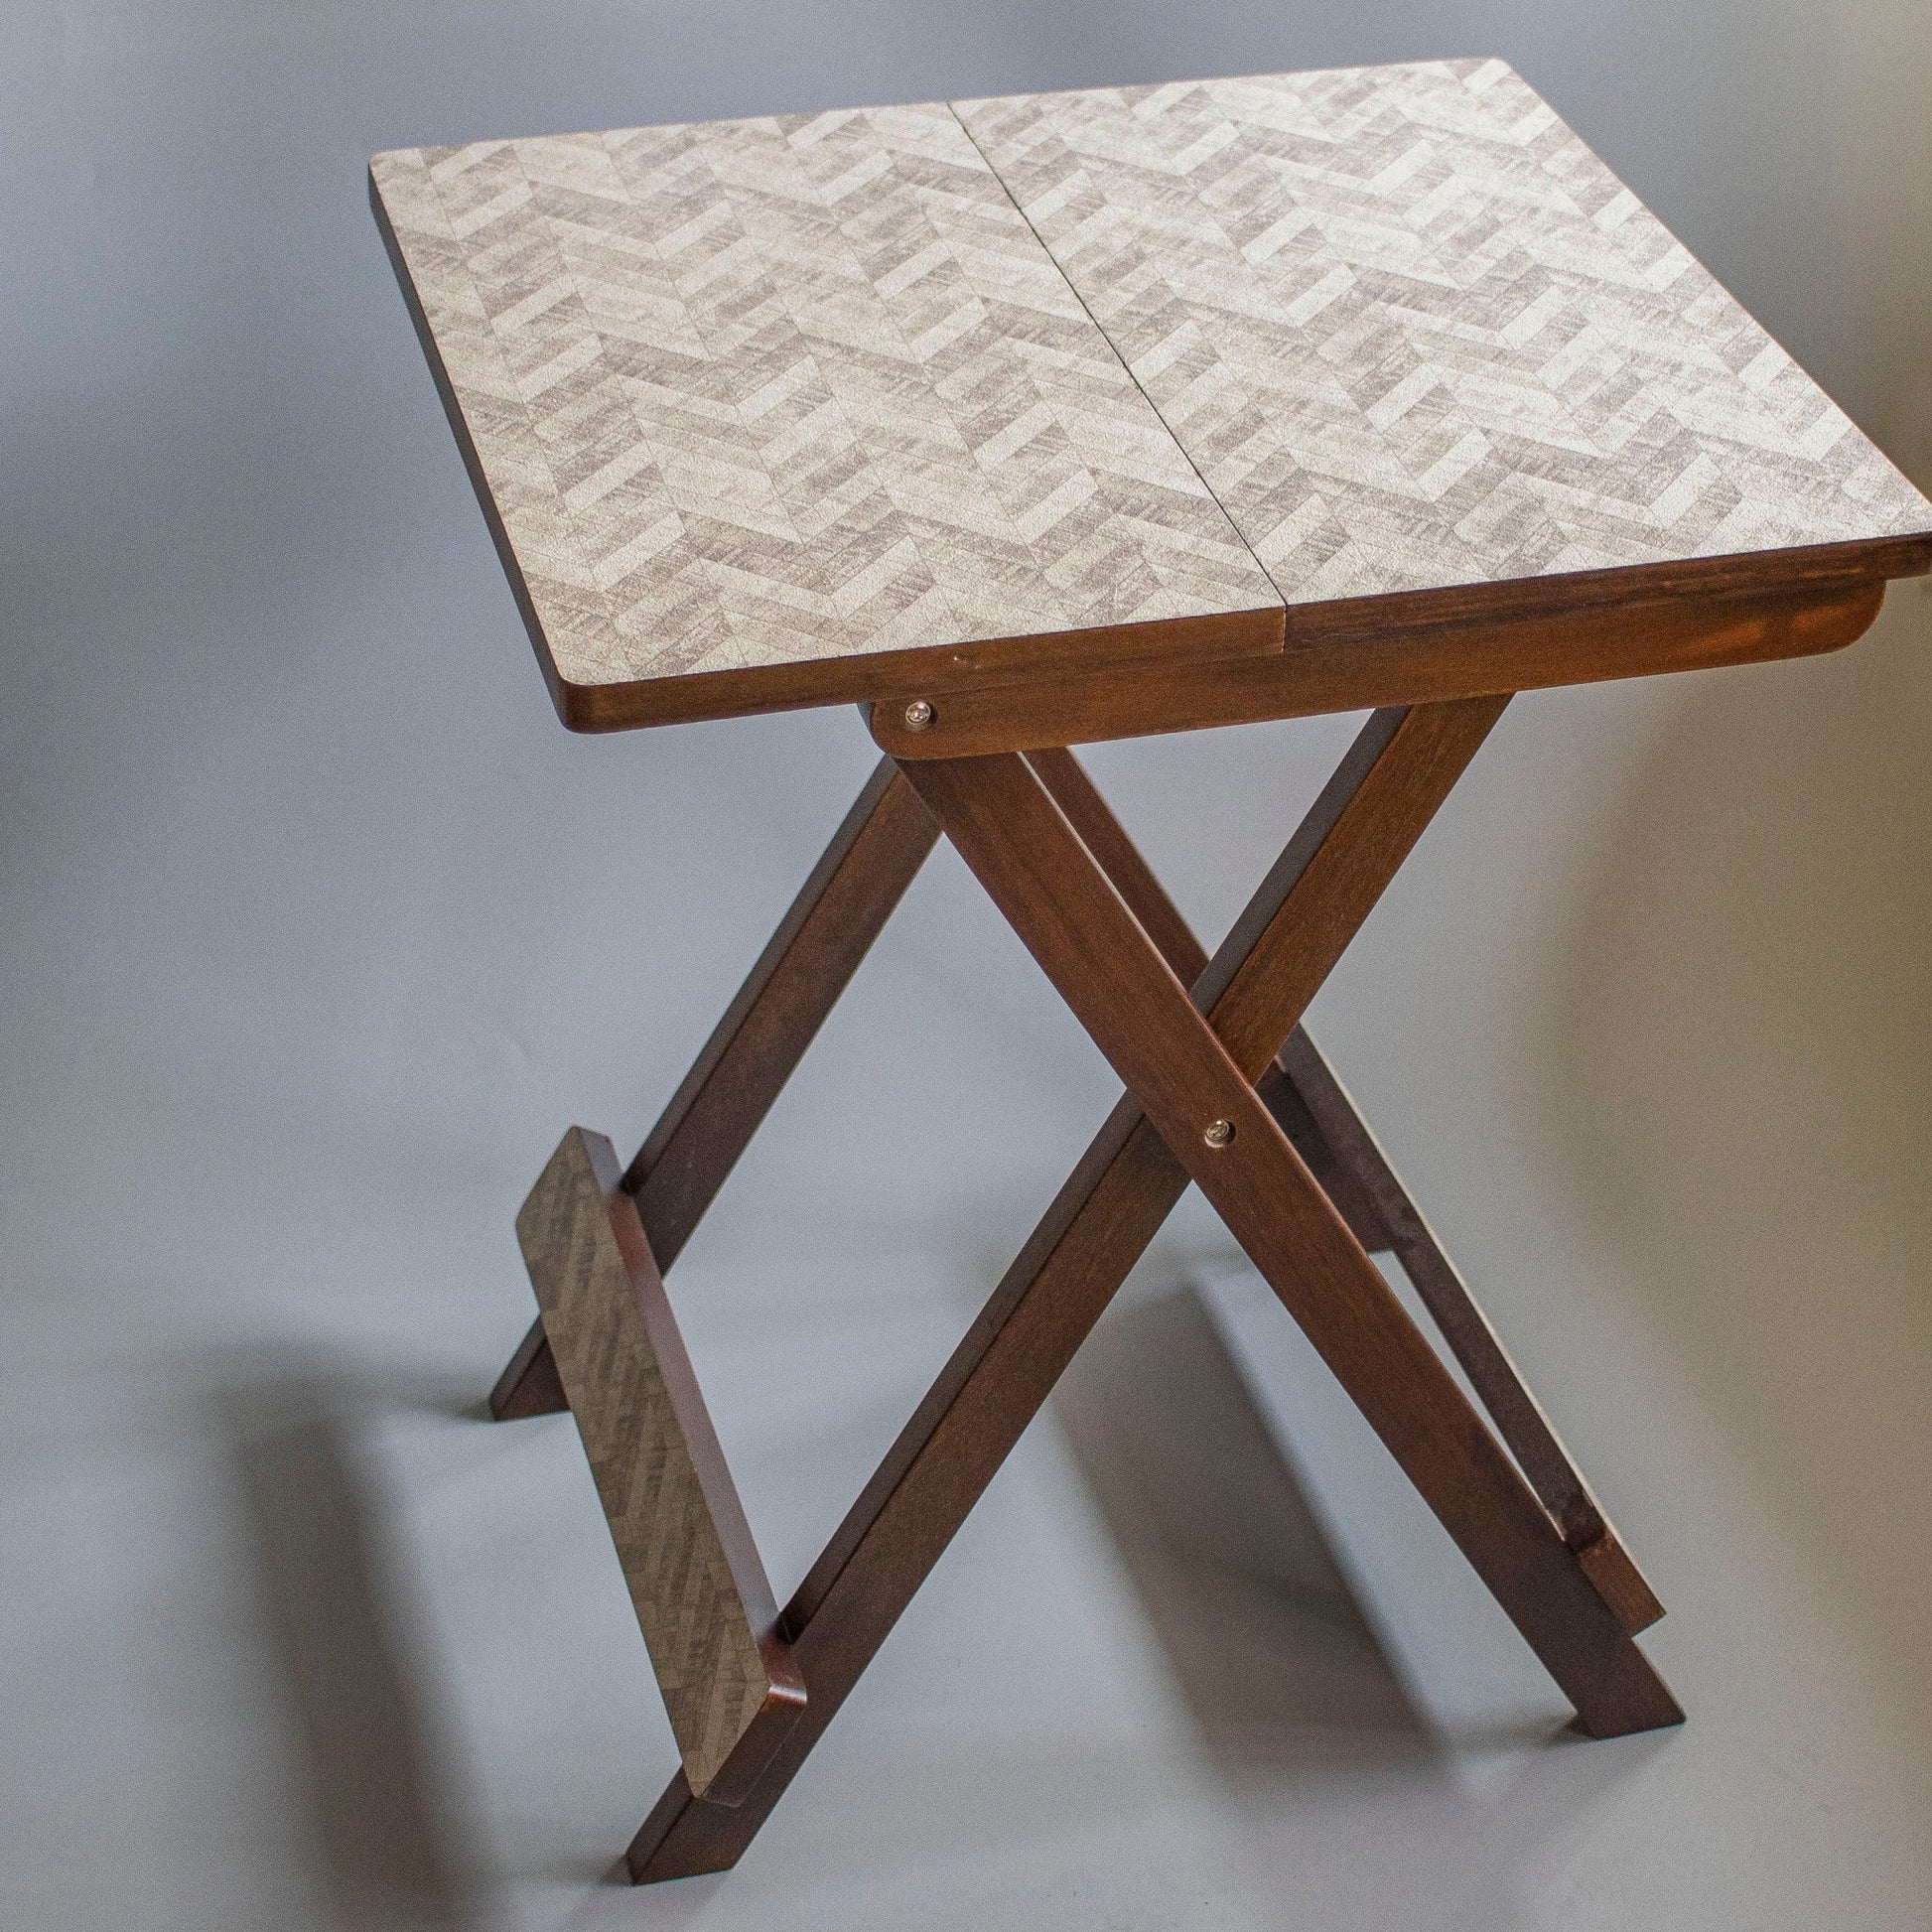 Kashmiri : Wooden Fodable Tables With Textured Finish - Ebony WoodcraftsFolding Tables, Side Tables, End Table